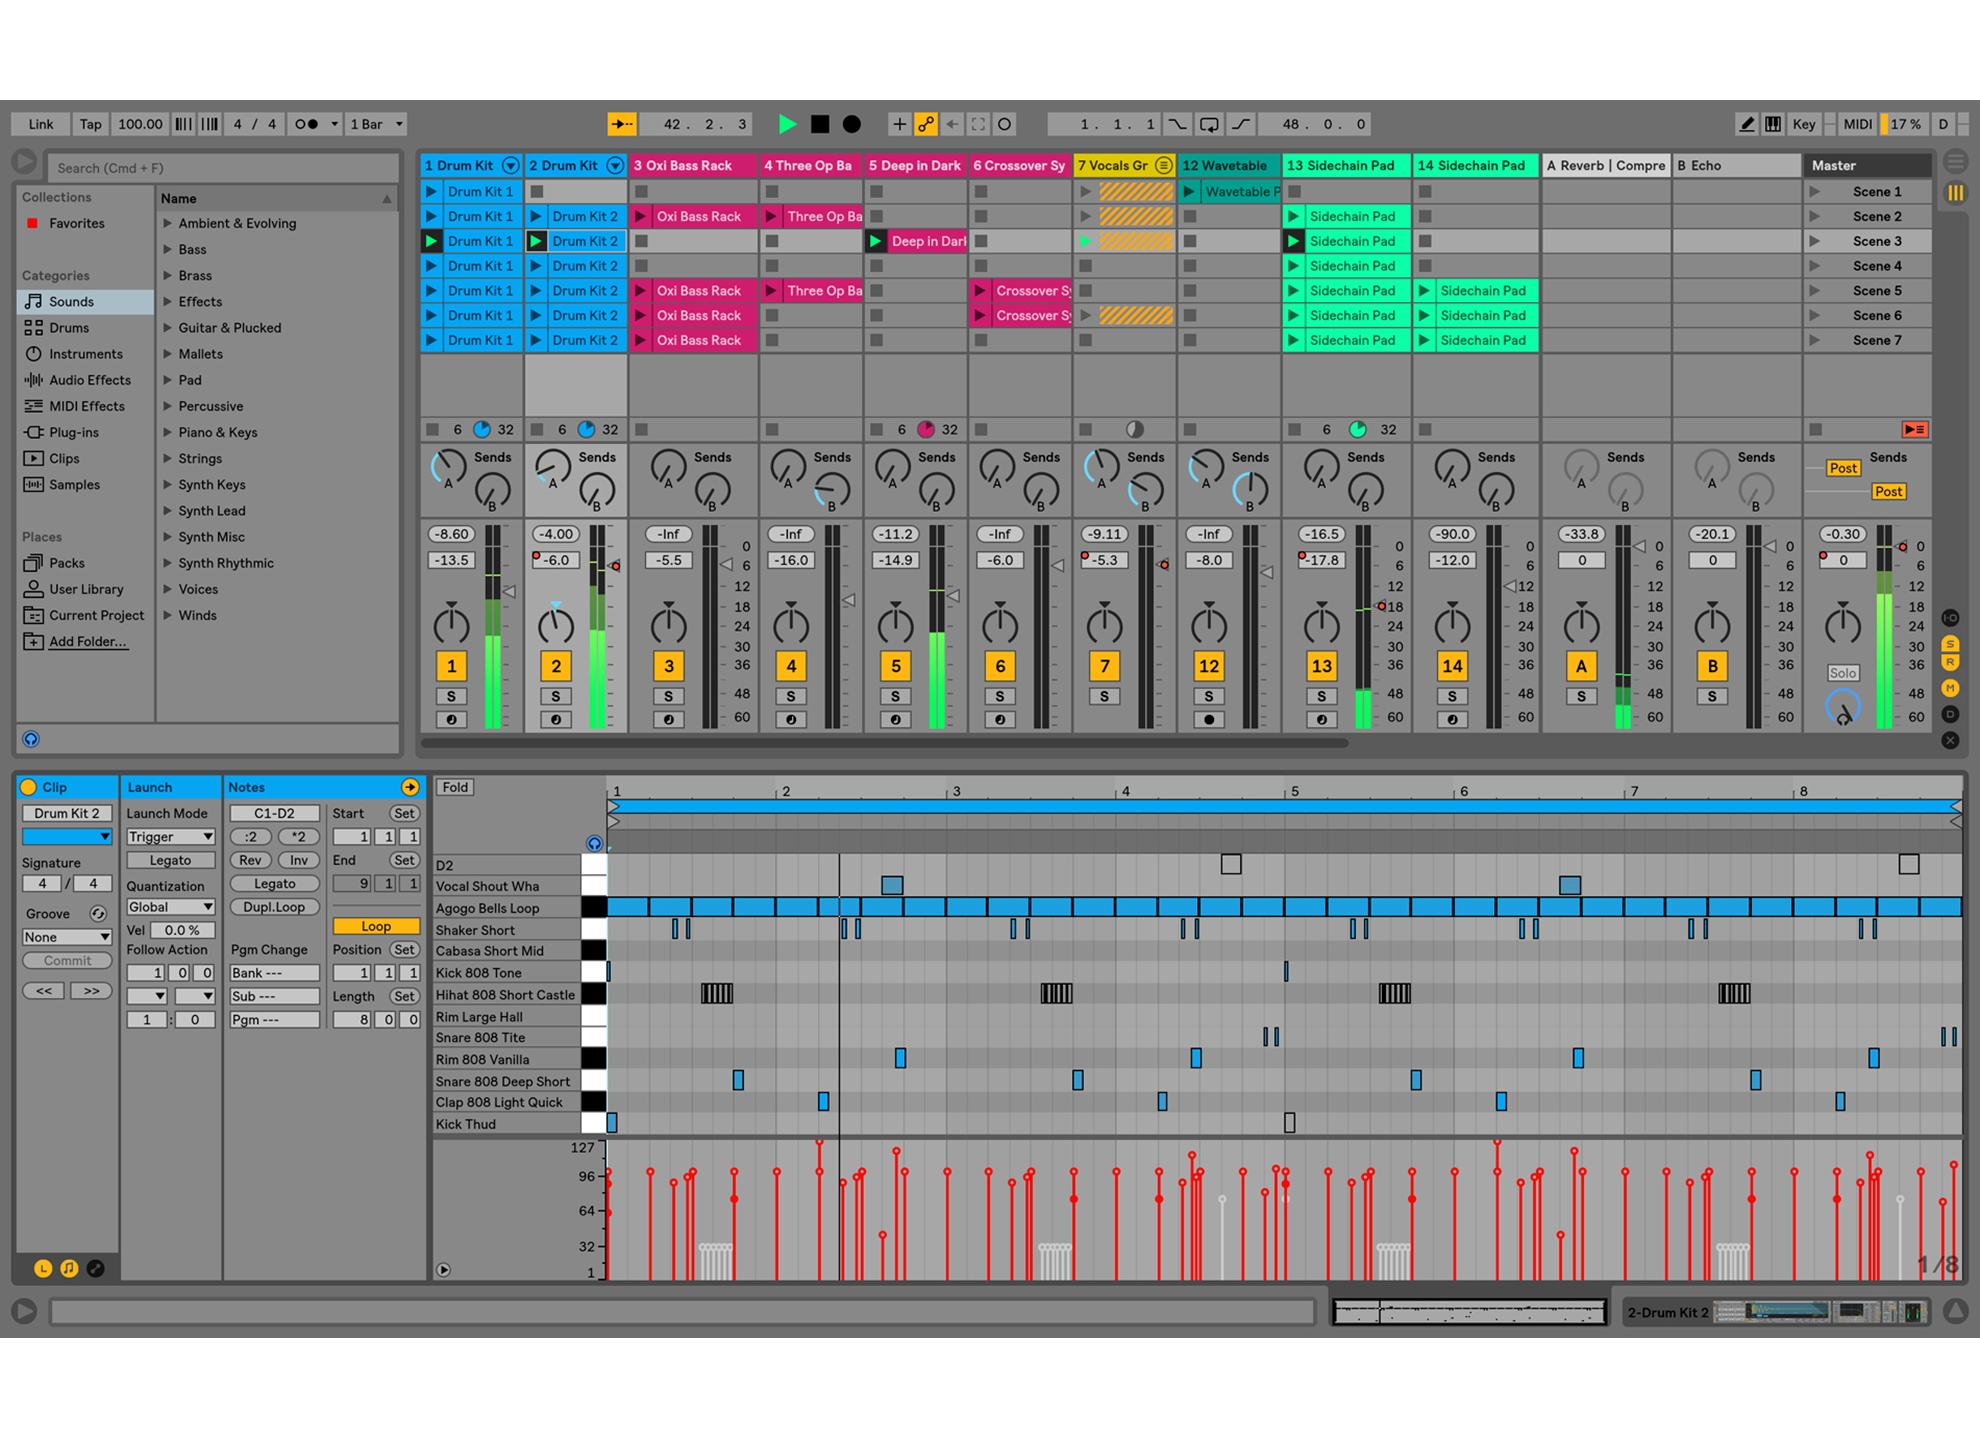 ableton live 10 download unauthorized